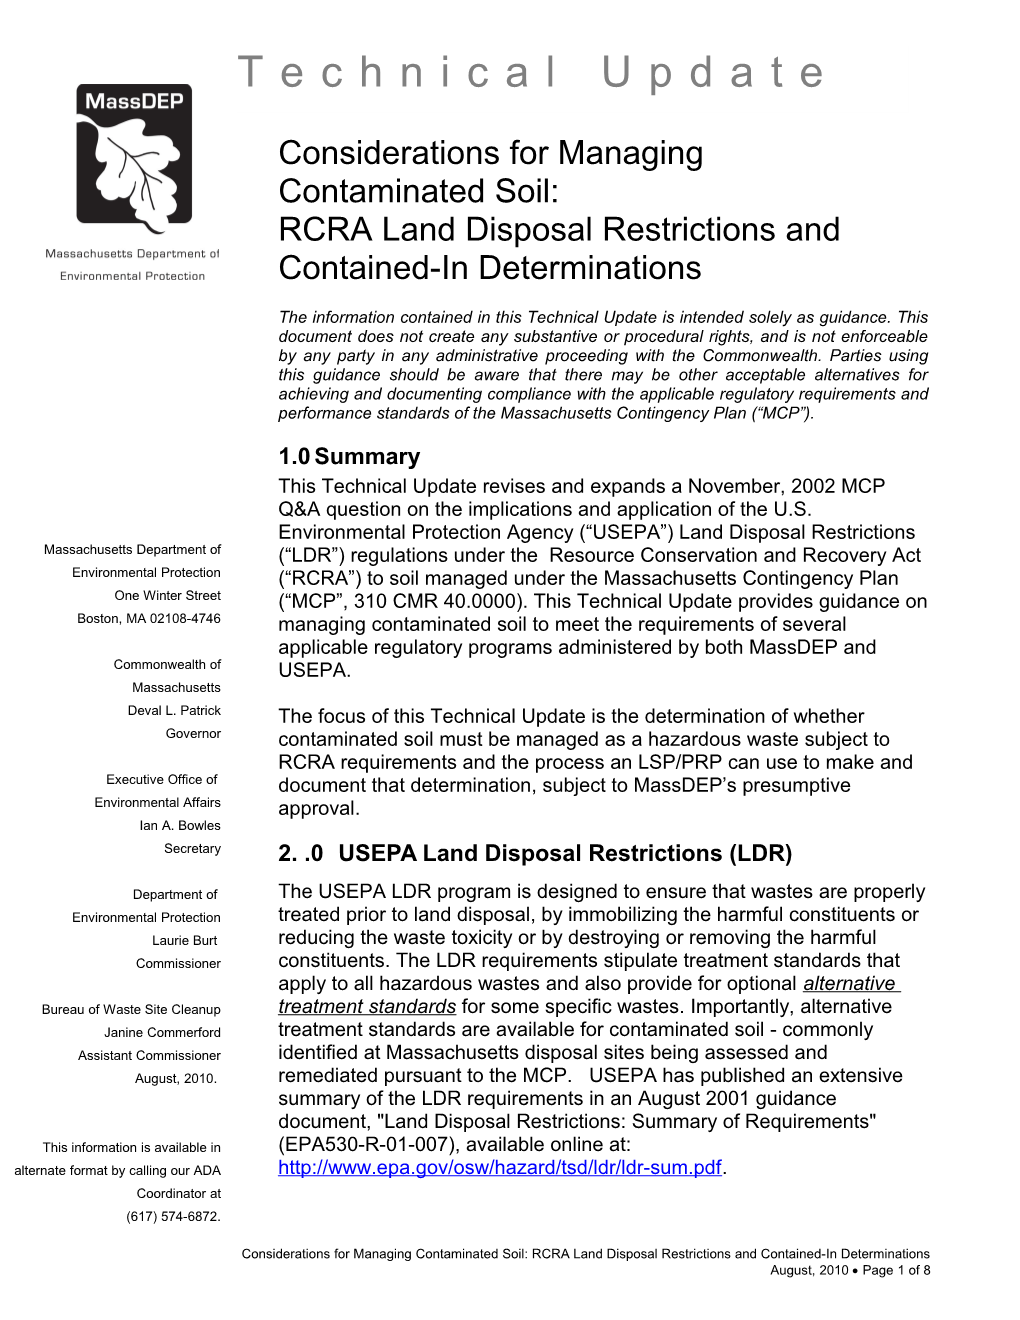 Considerations for Managing Contaminated Soil: RCRA Land Disposal Restrictions and Contained-In